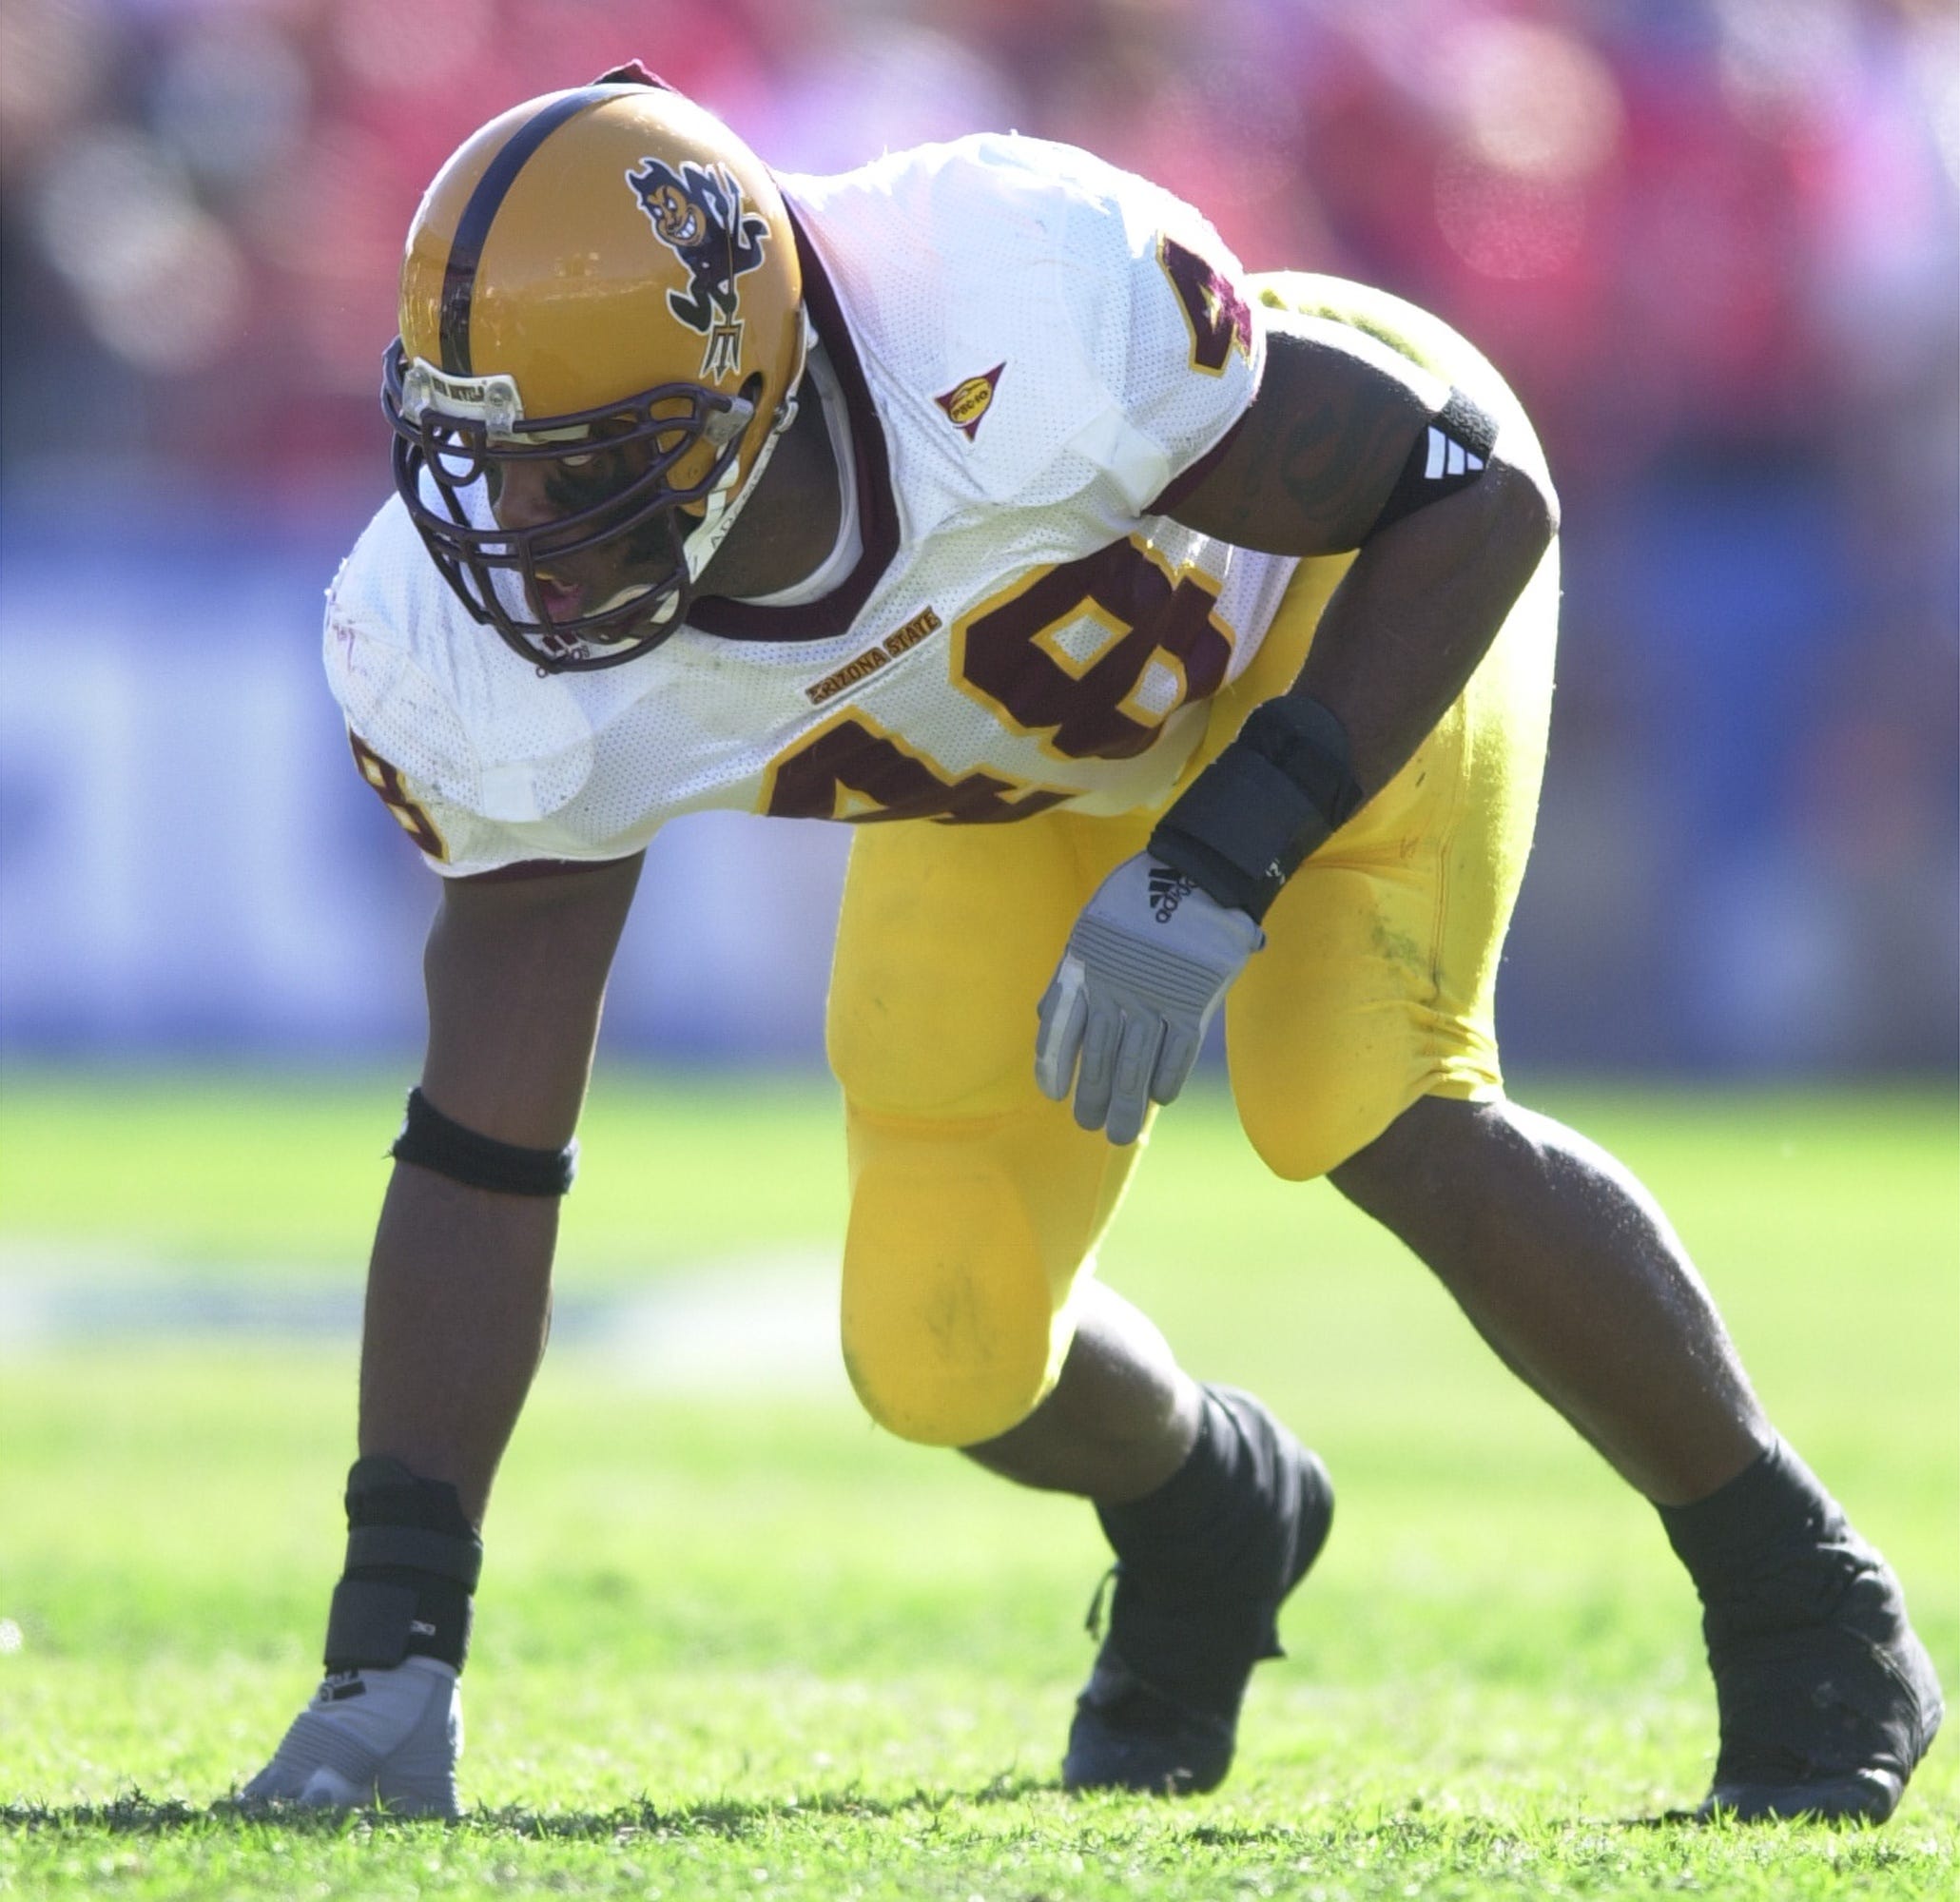 Terrell Suggs at ASU in 2002